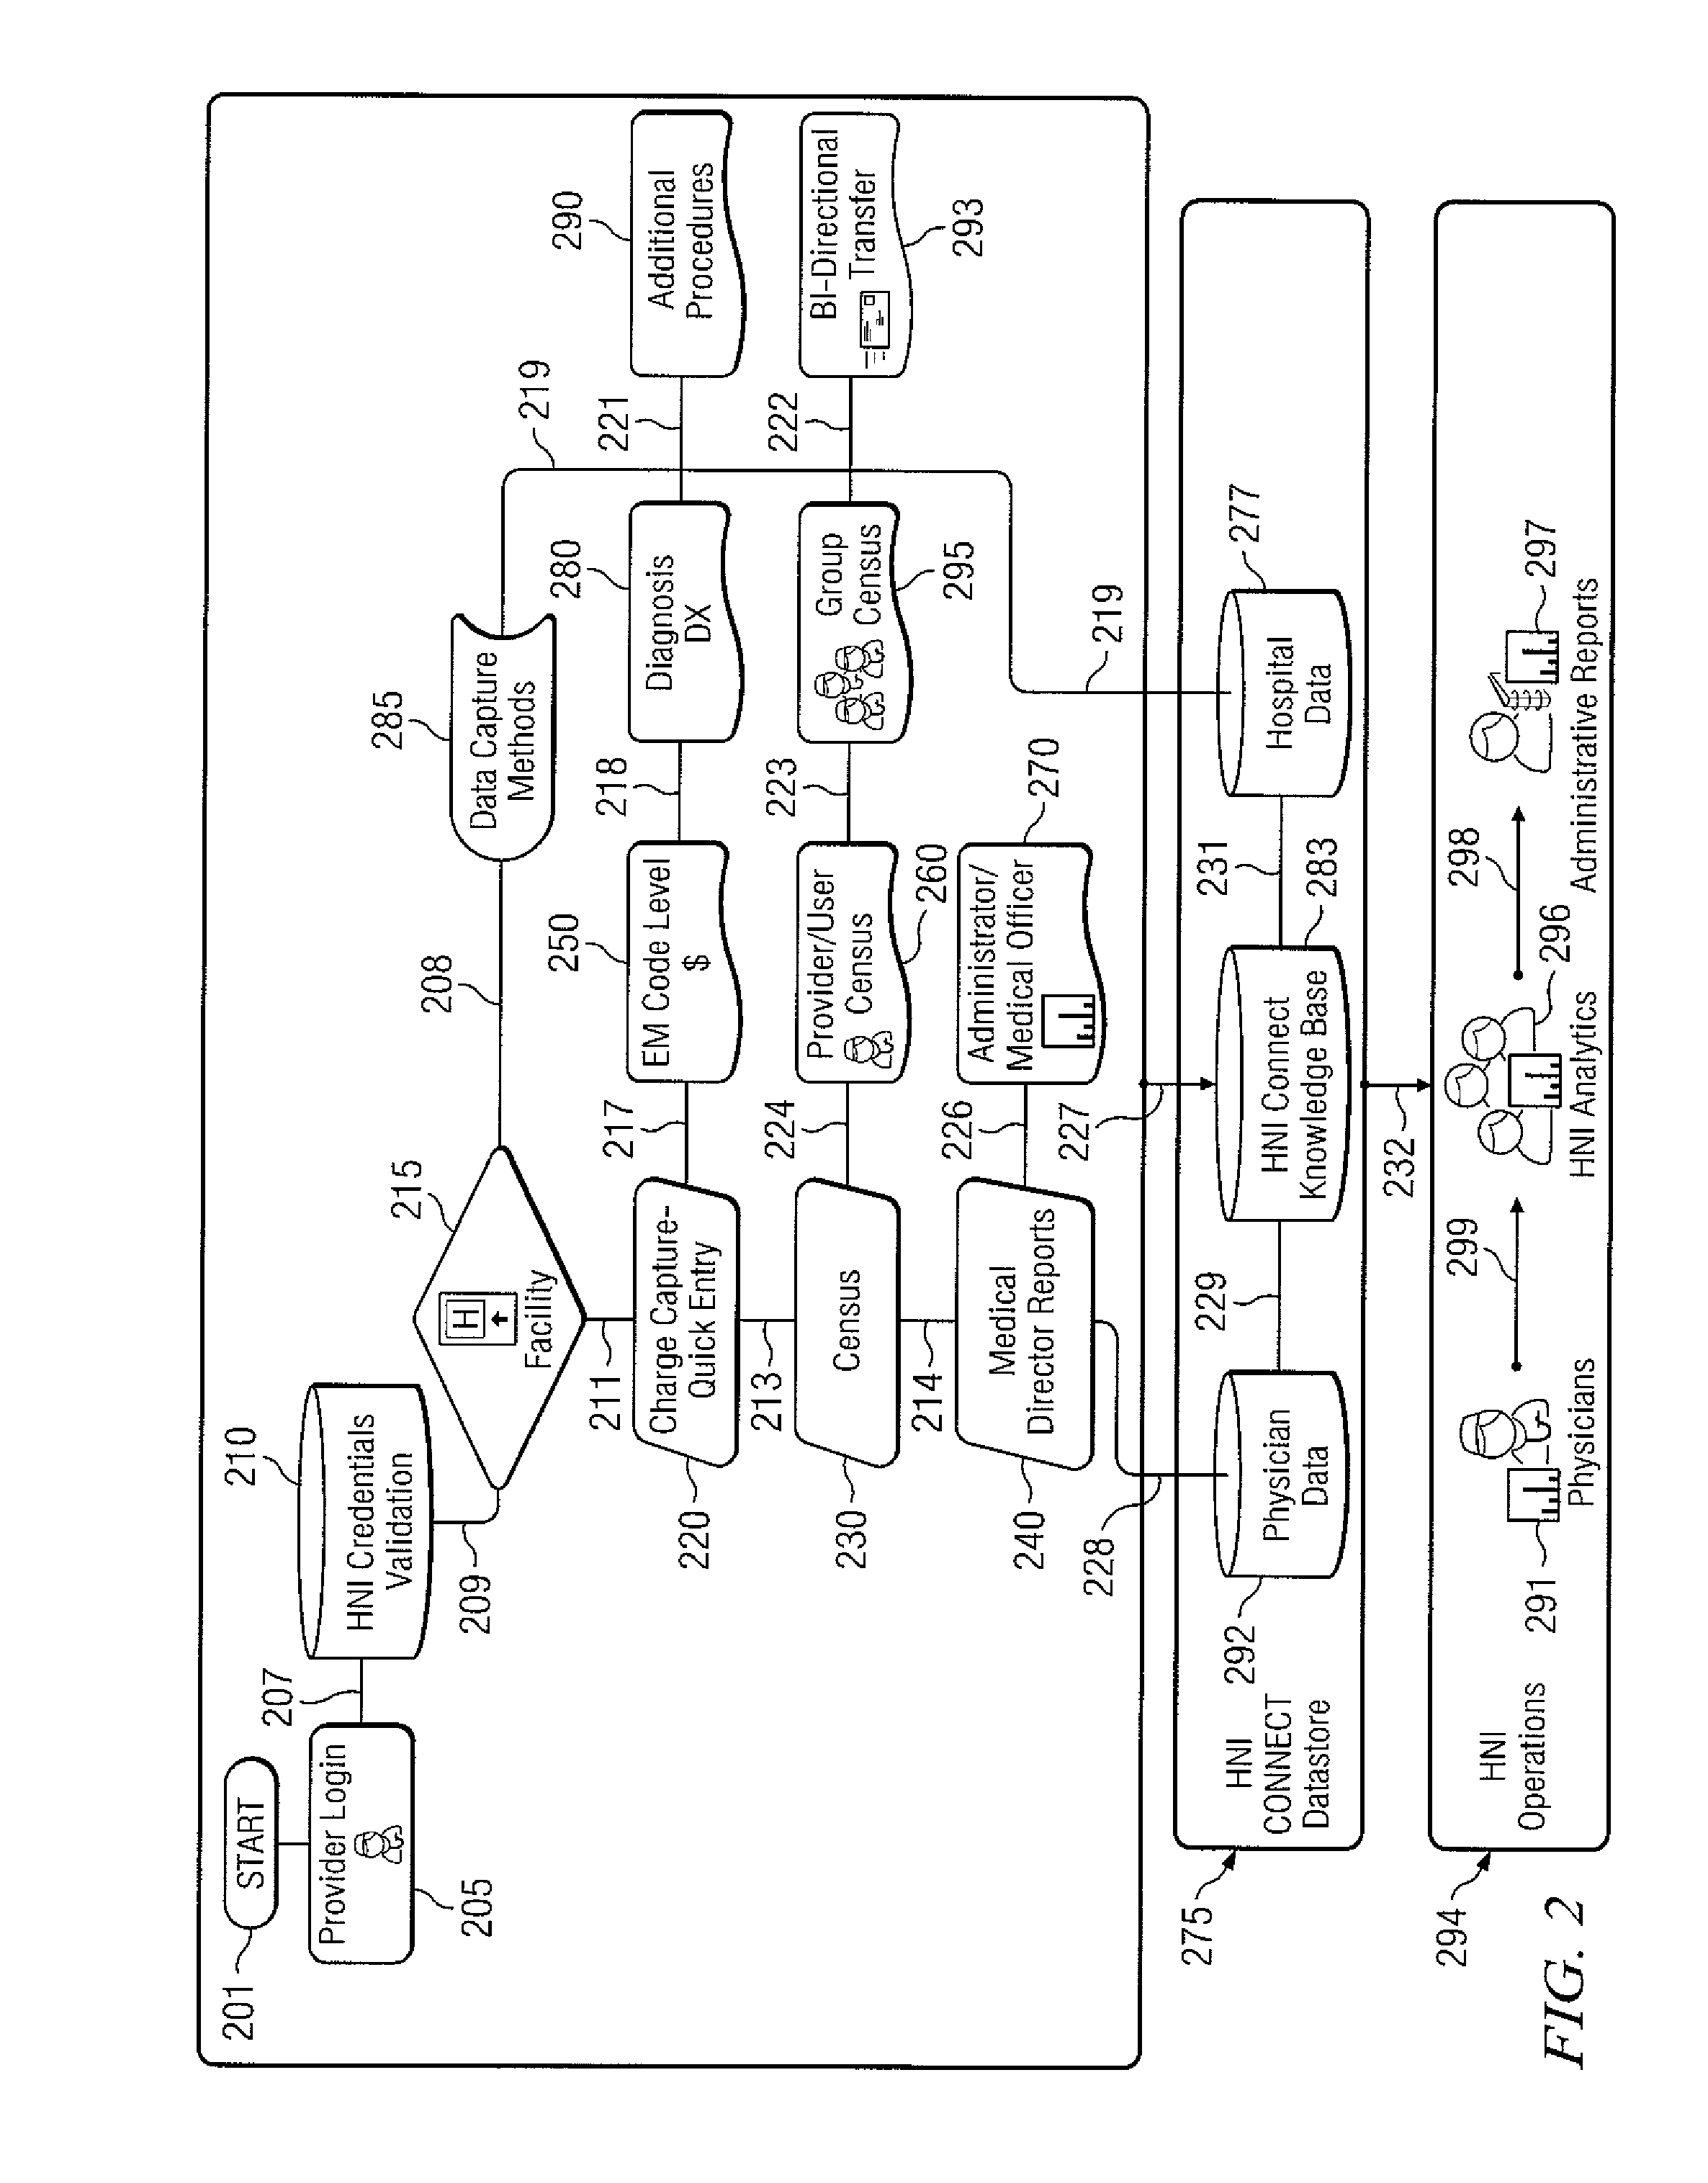 System and method for maintaining hospitalist and patient information